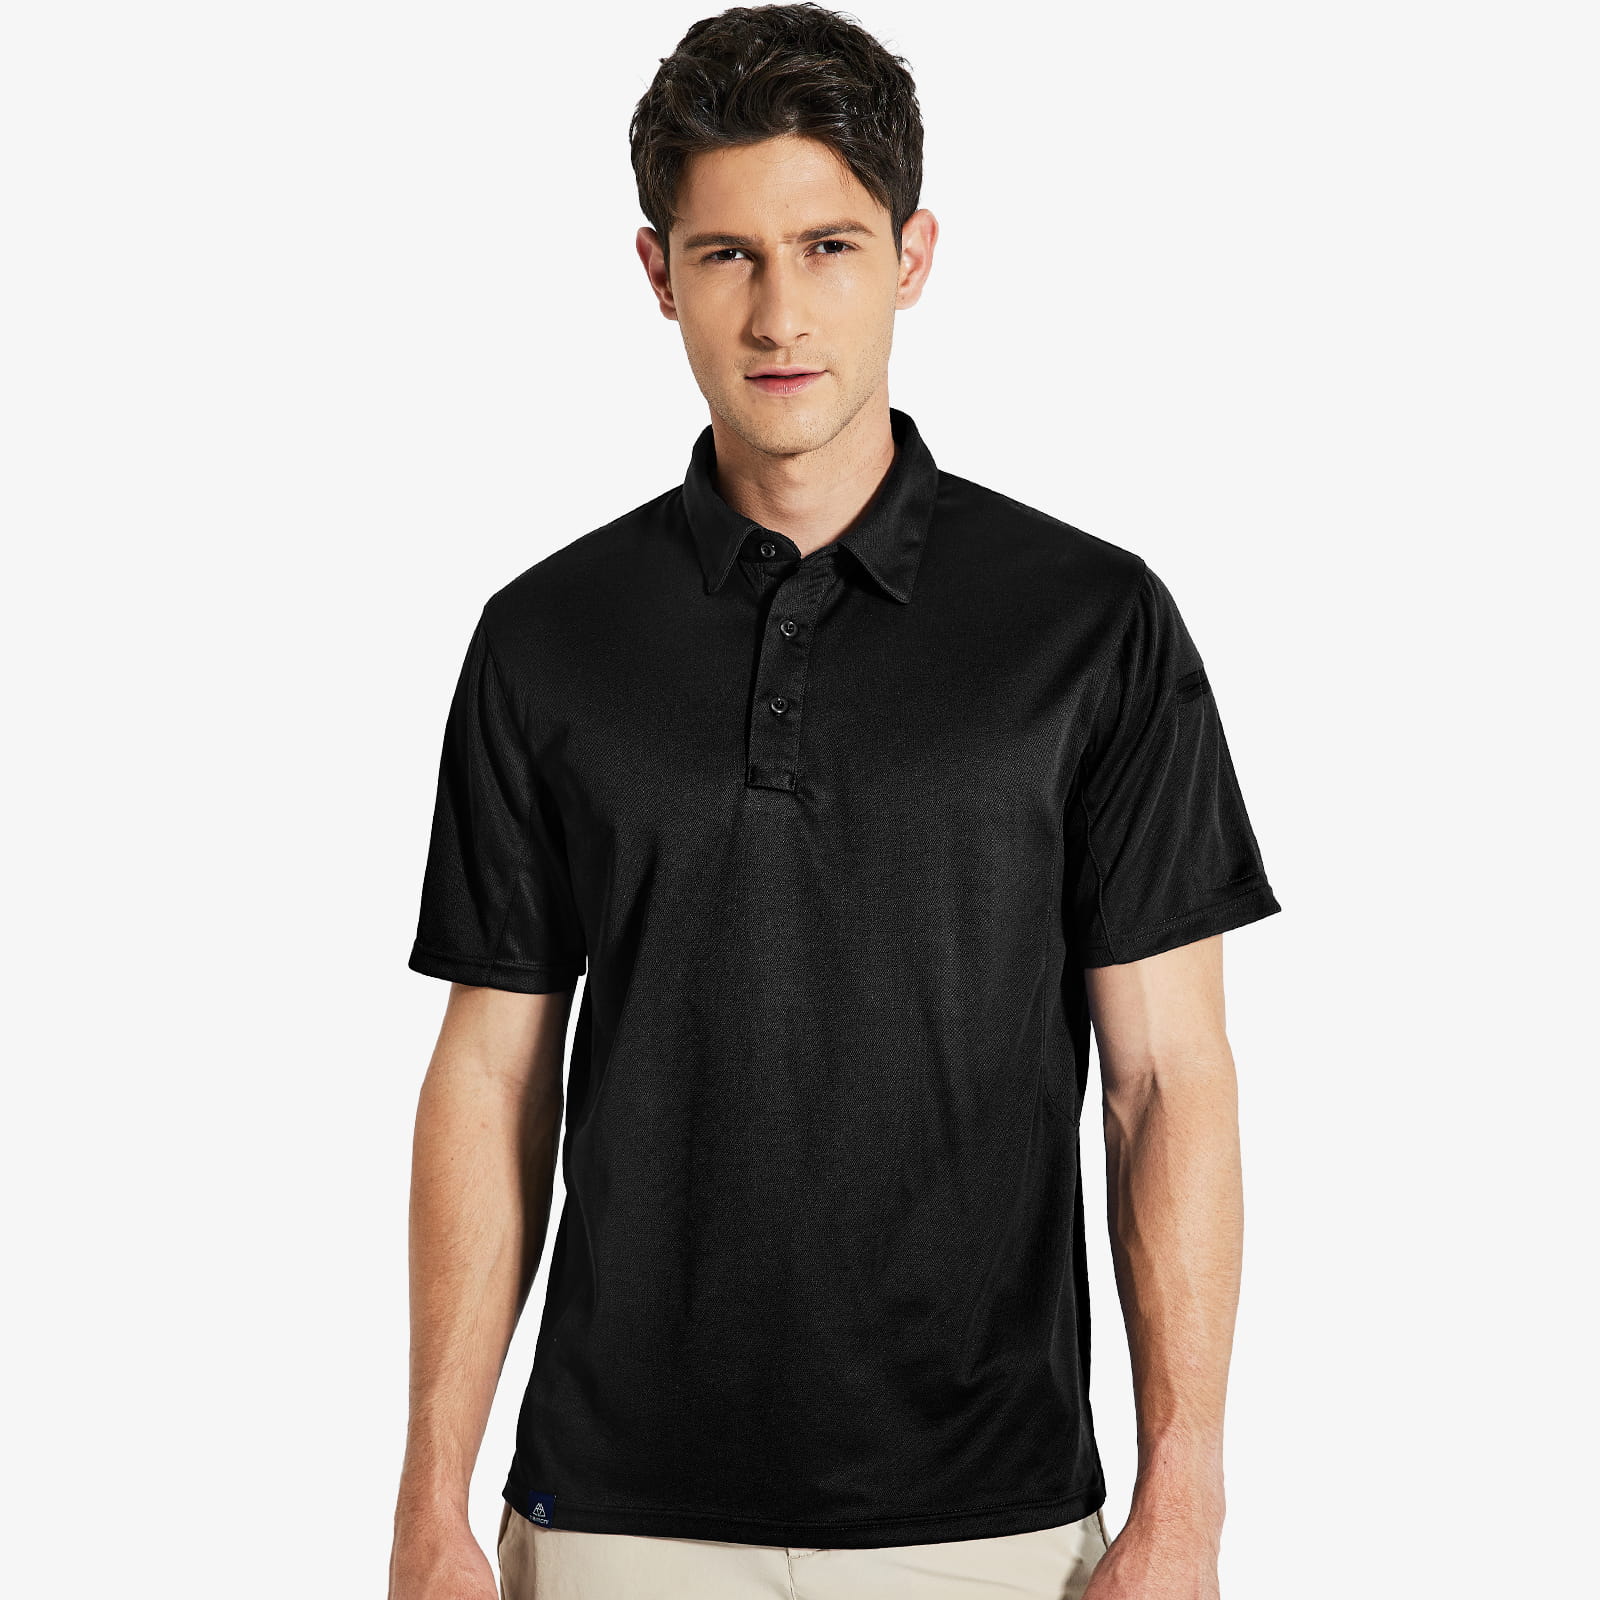 Haimont Men's Polo Shirt Quick Dry Tactical Collared T-Shirts